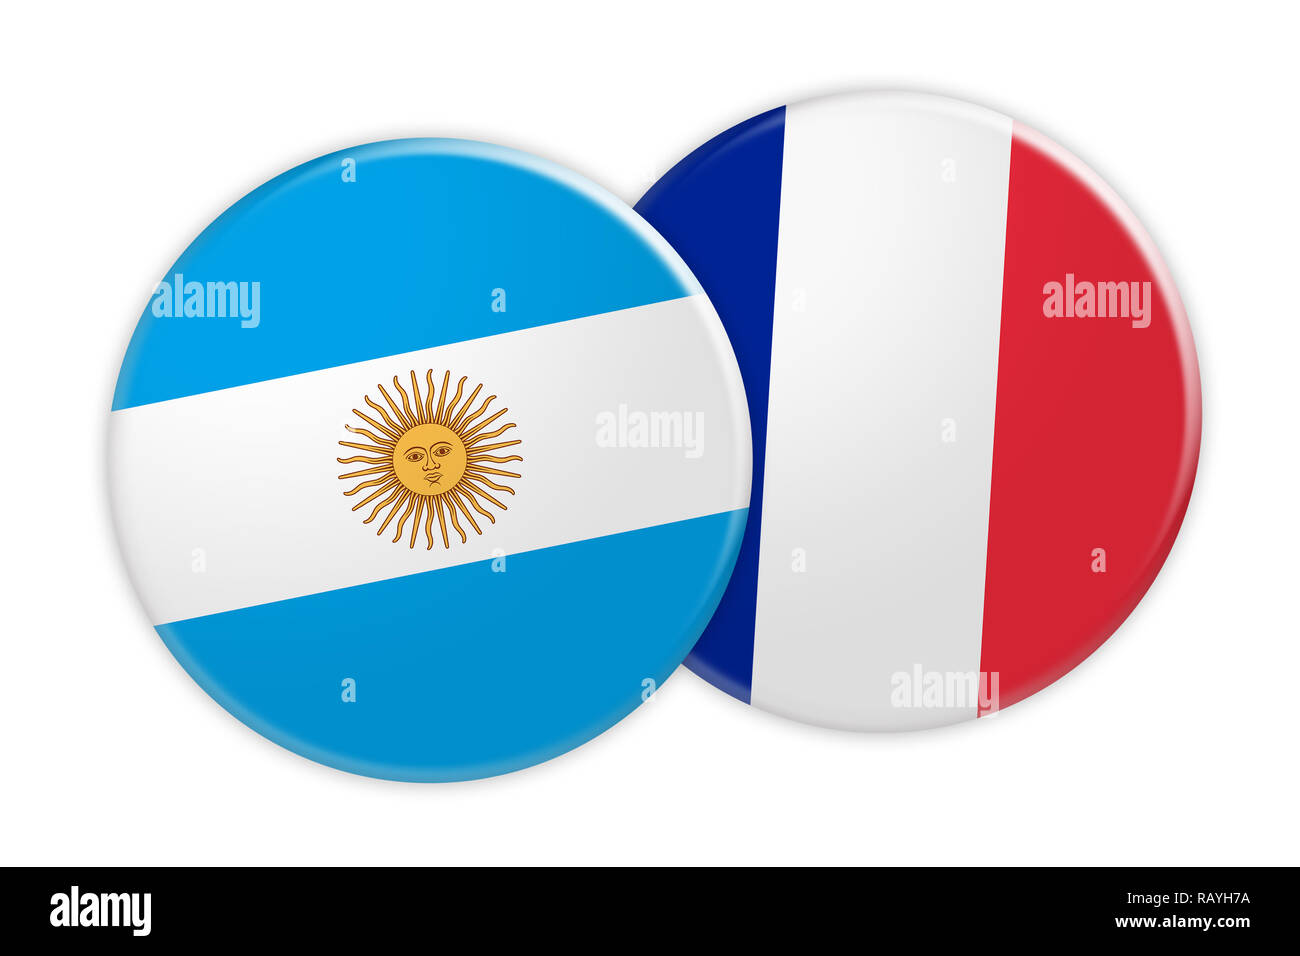 News Concept: Argentina Flag Button On France Flag Button, 3d illustration on white background Stock Photo